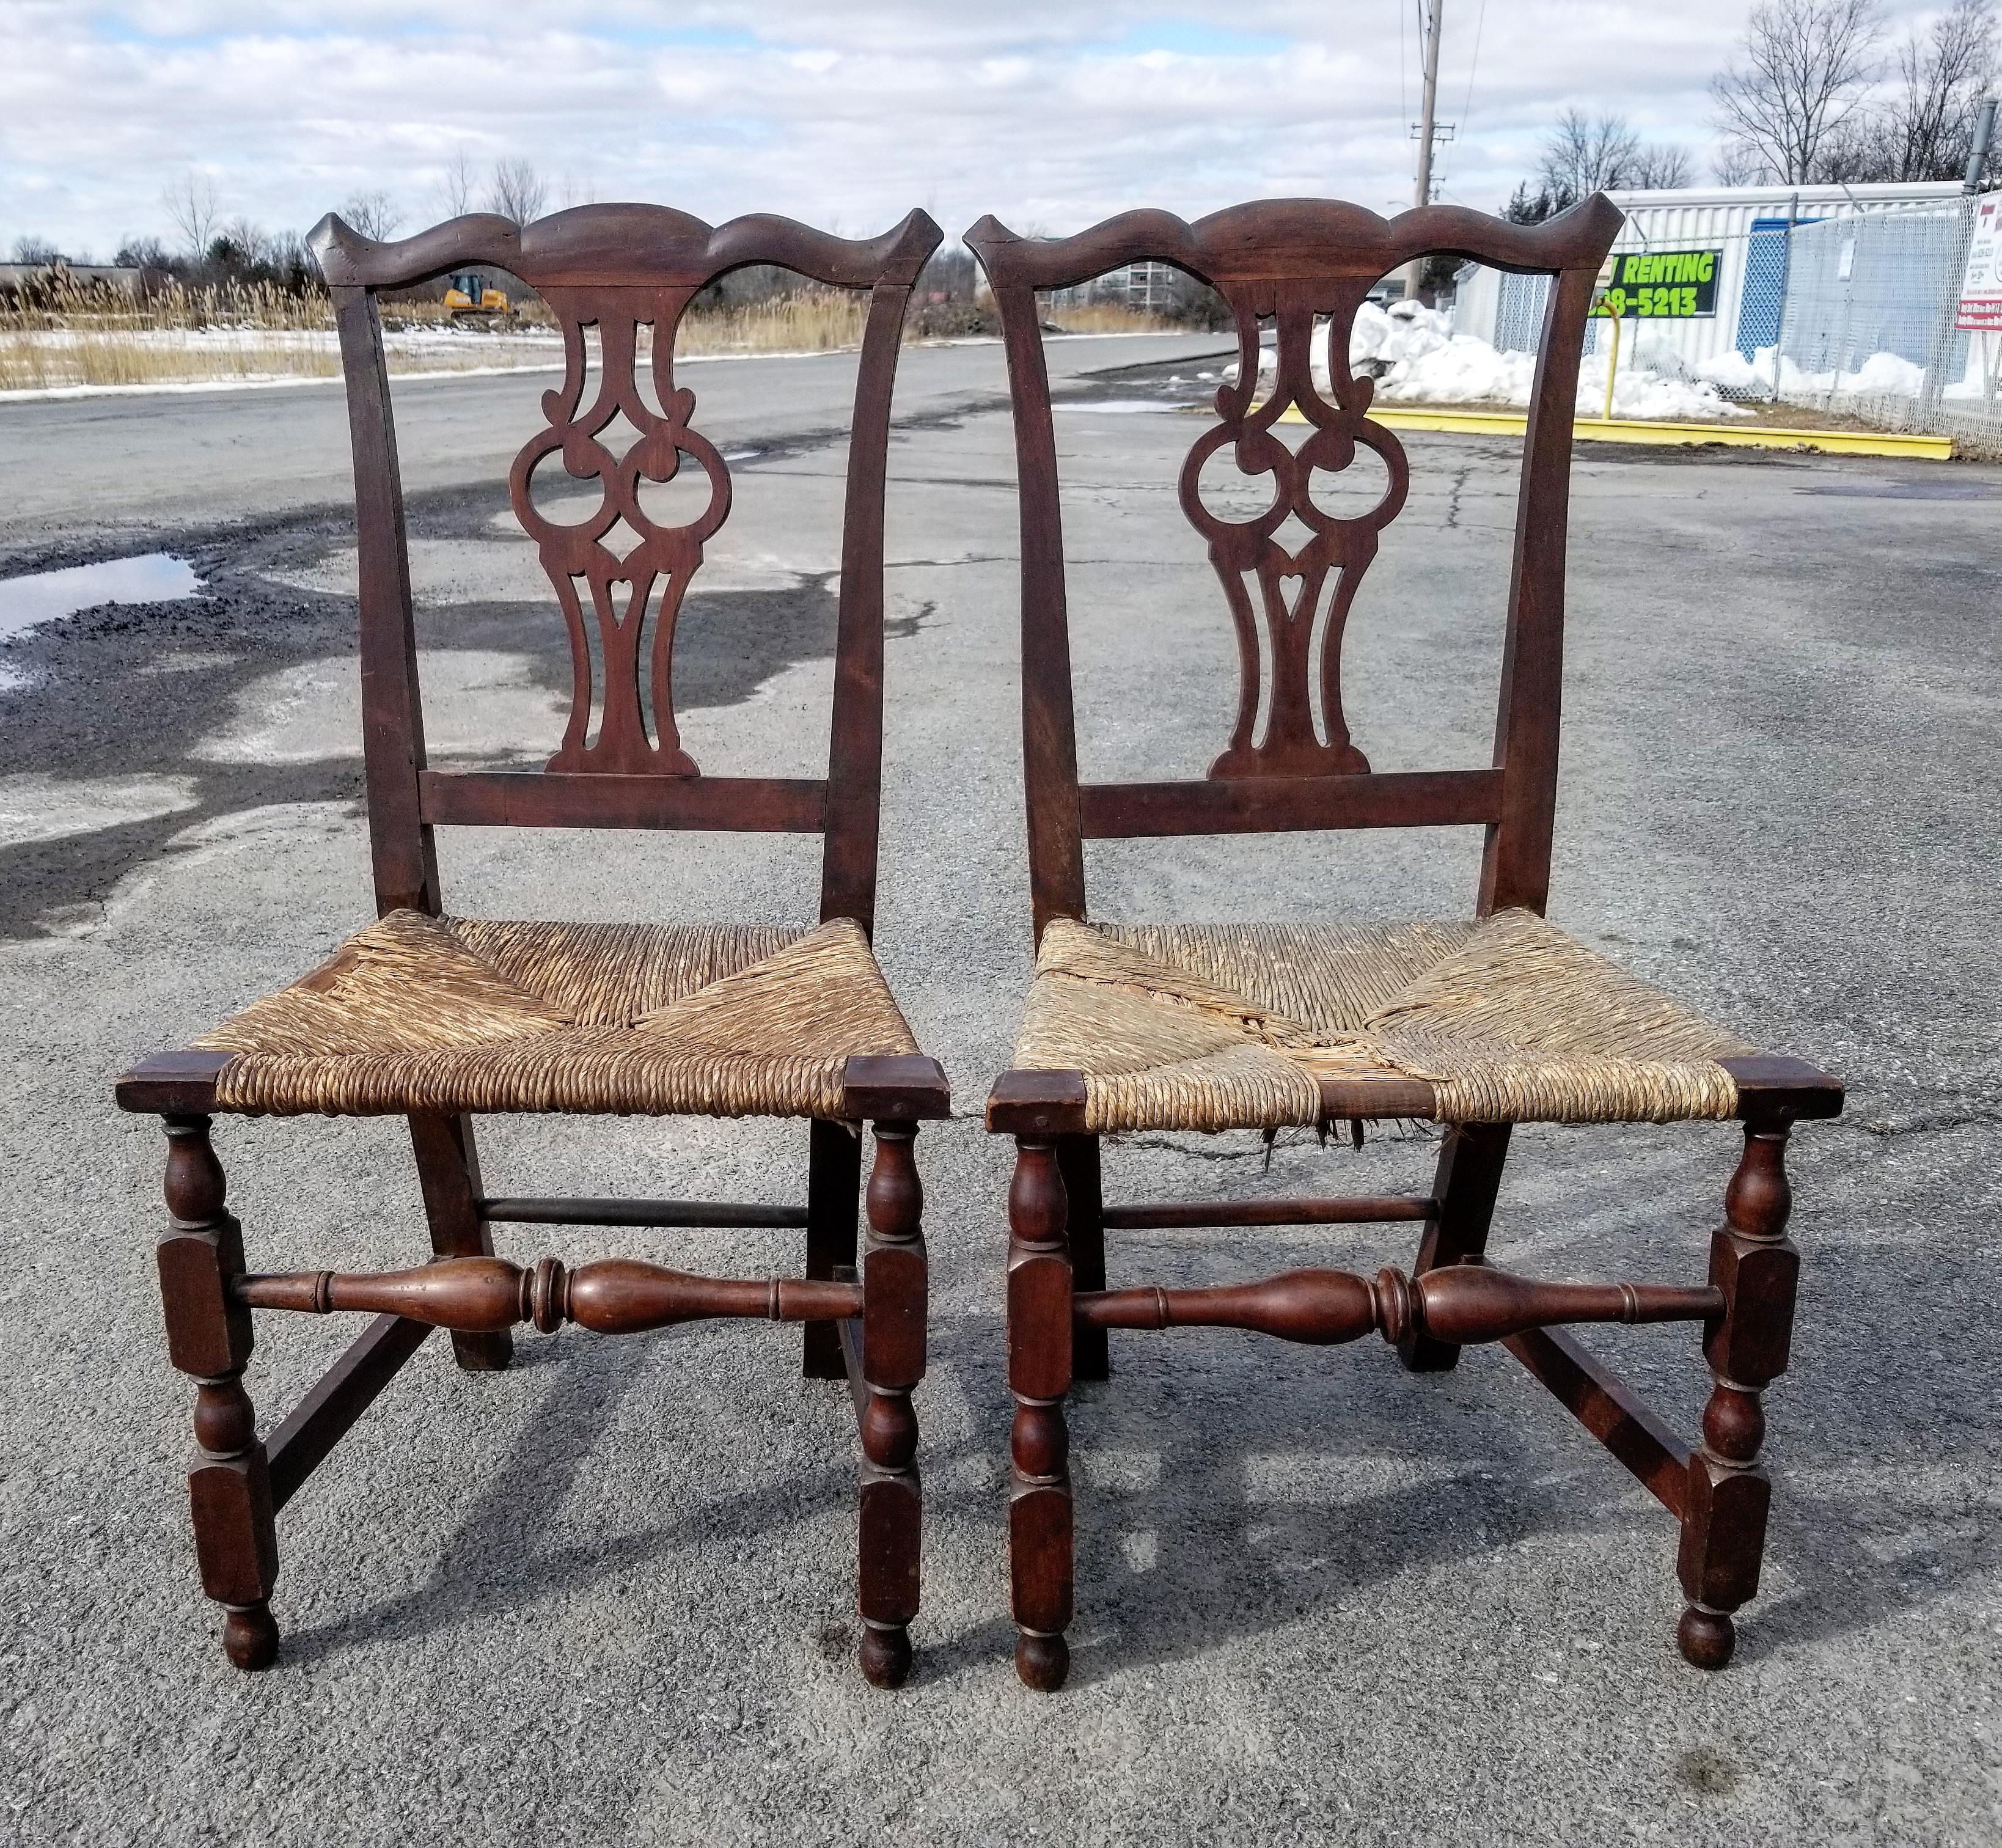 Beautiful pair of American Chippendale side chairs in with original surface and rush Seats. Likely from Salem Massachusetts these chairs display tight serpentine crests with upswept ears above owl splats flanked by swept stiles; trapezoidal seats